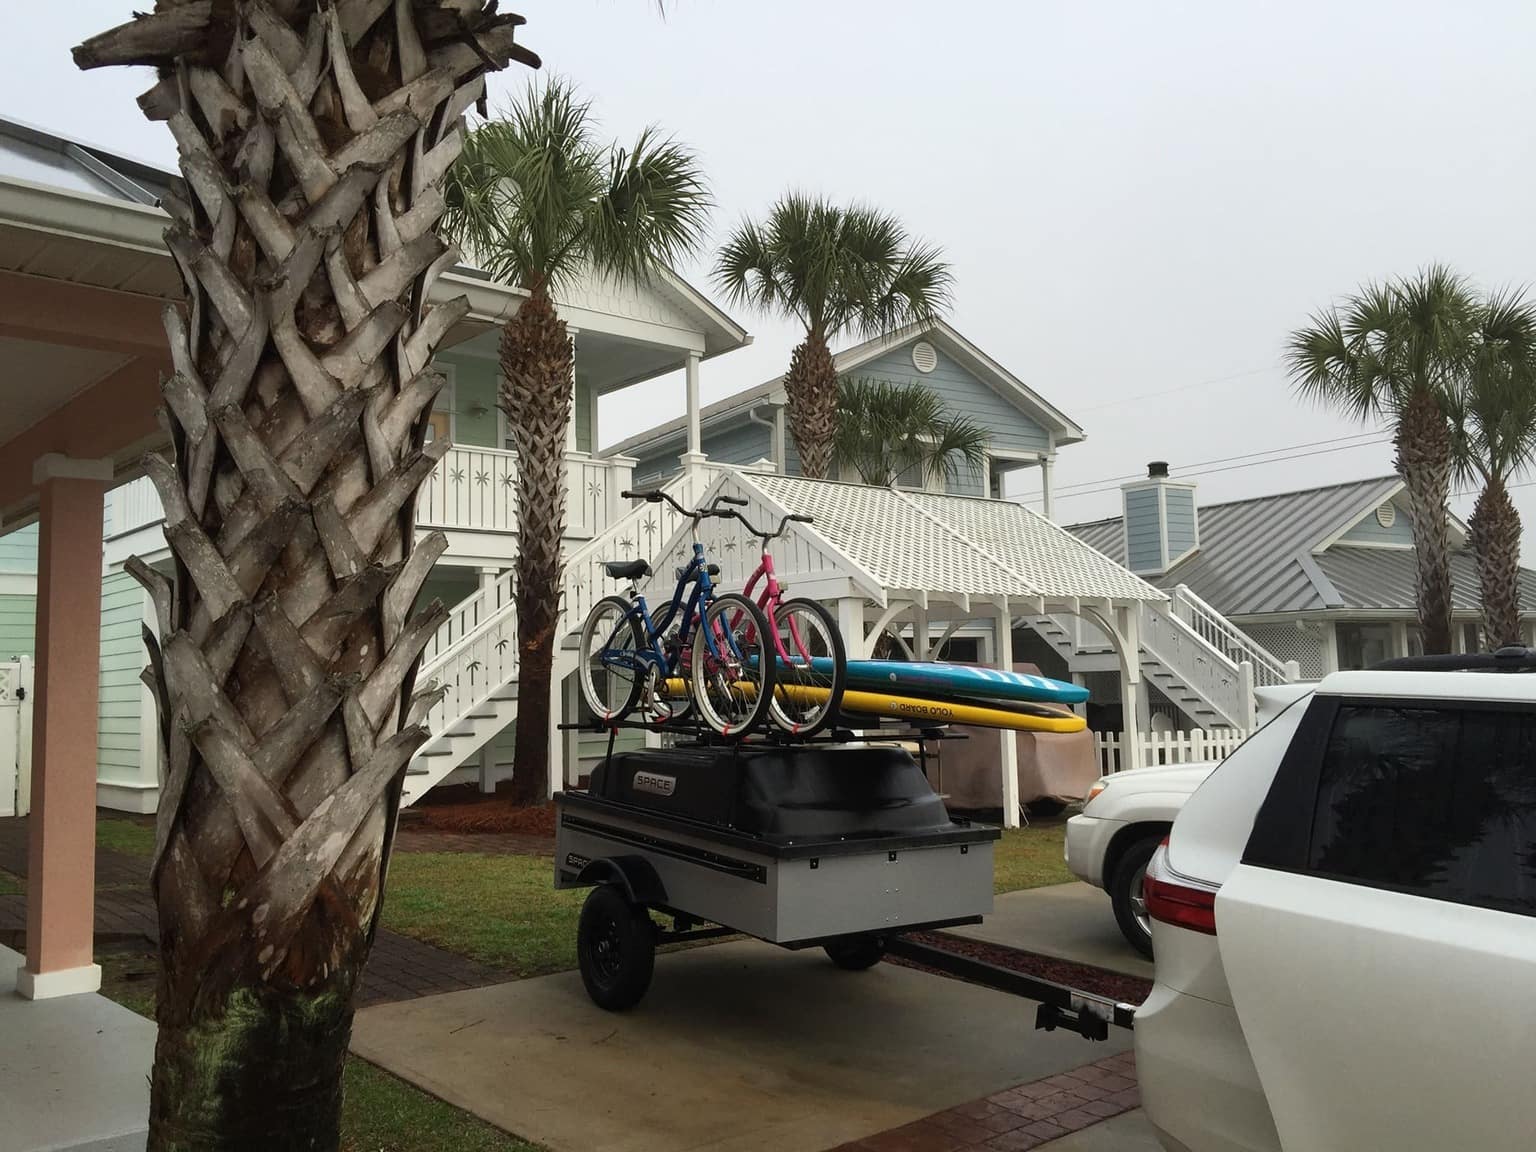 Space Trailer with bikes and paddle boards